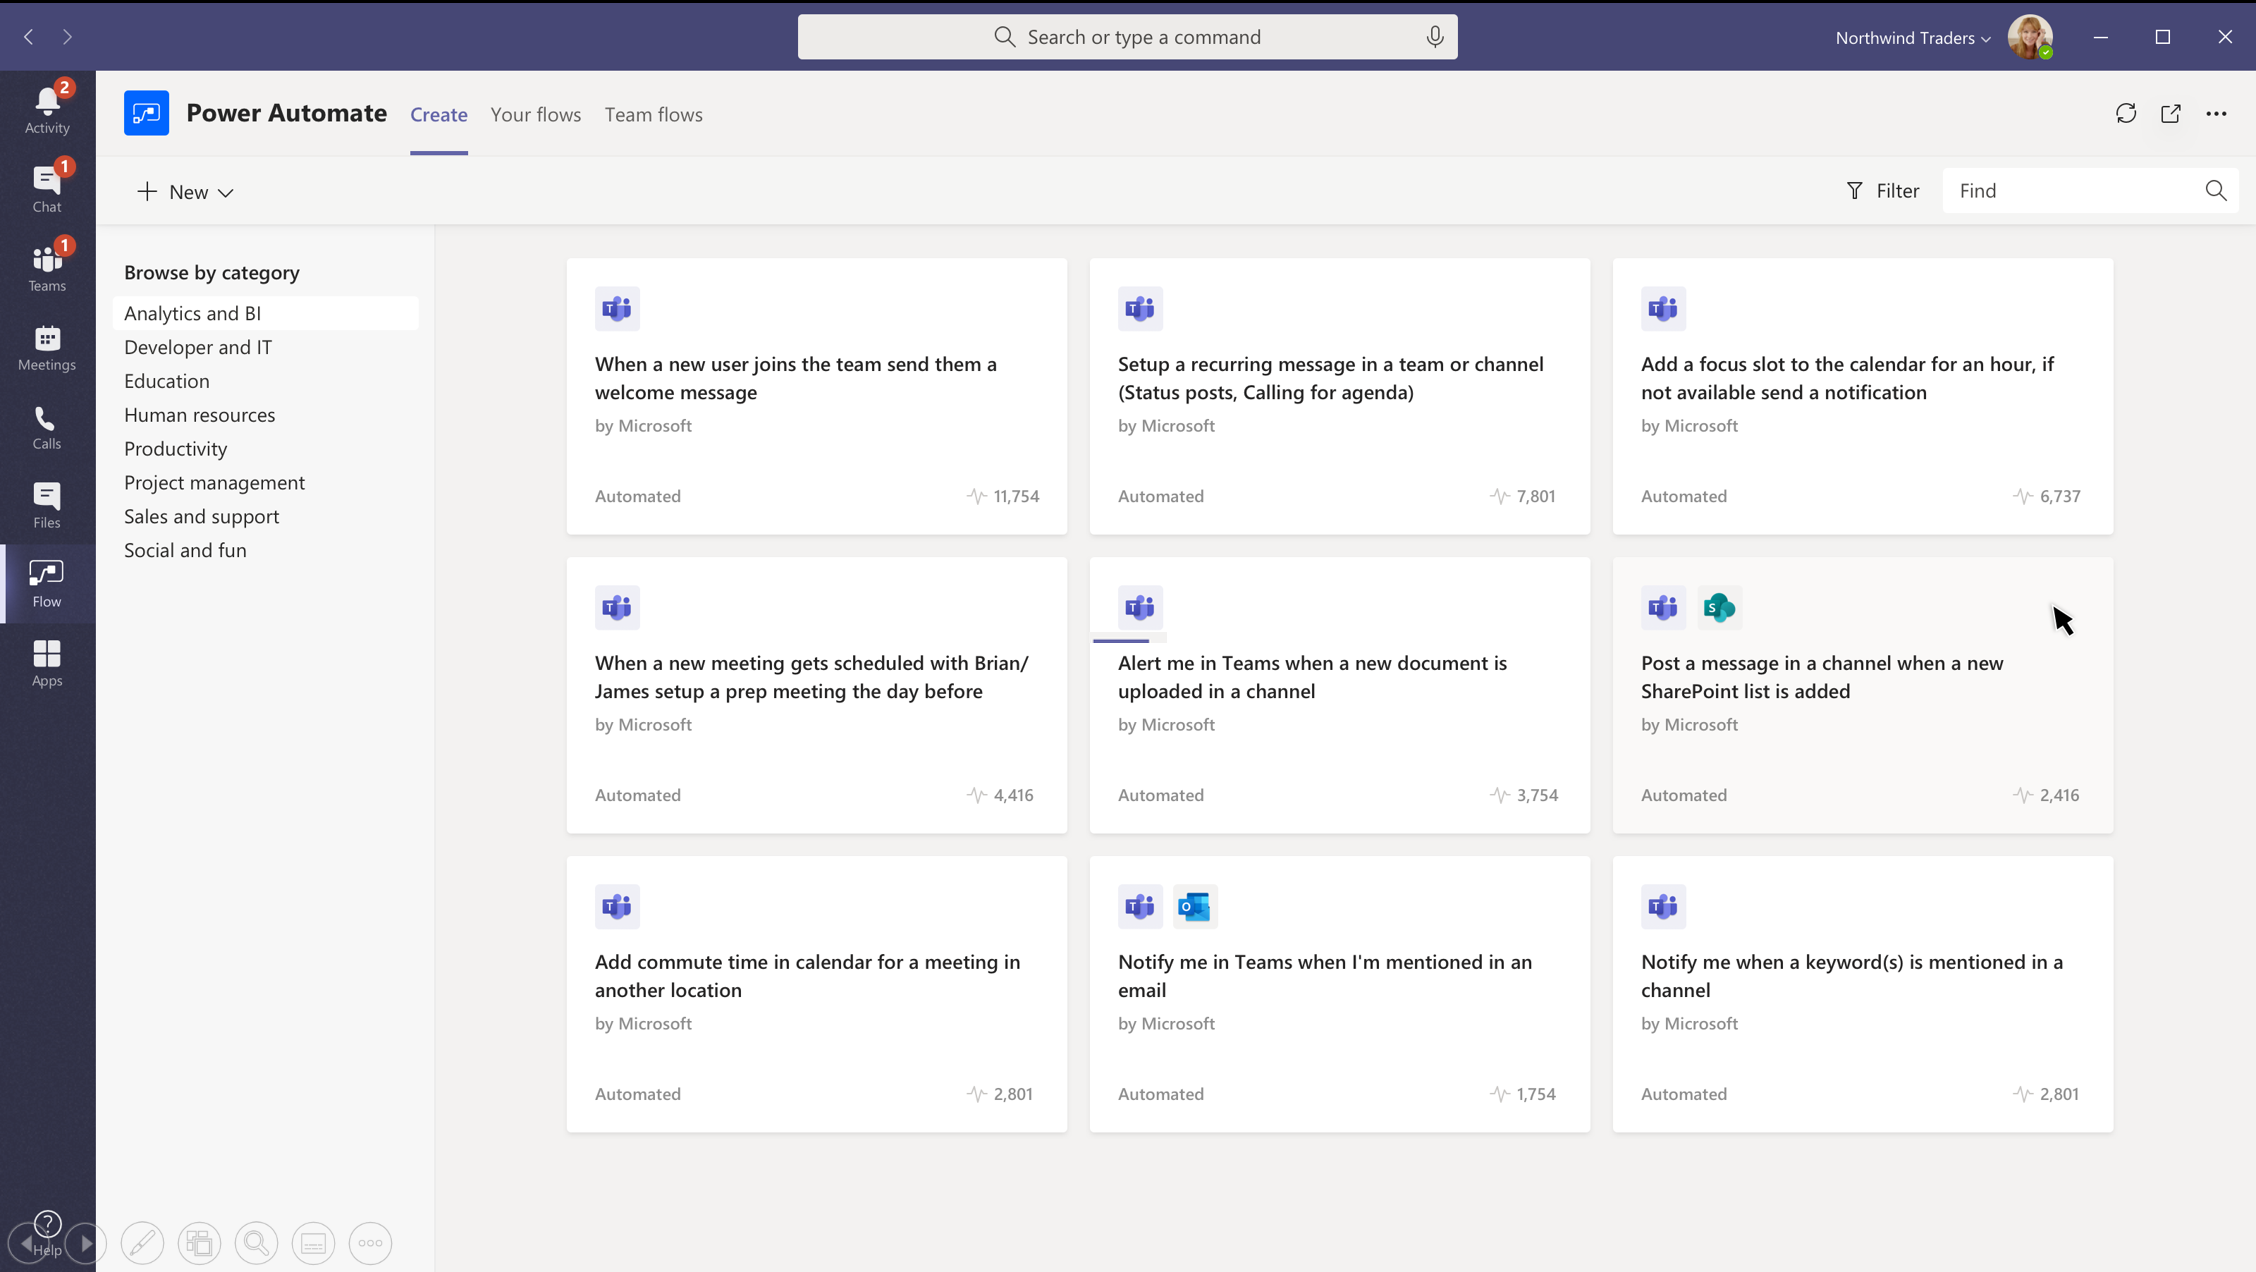 Power Automate templates in Microsoft Teams